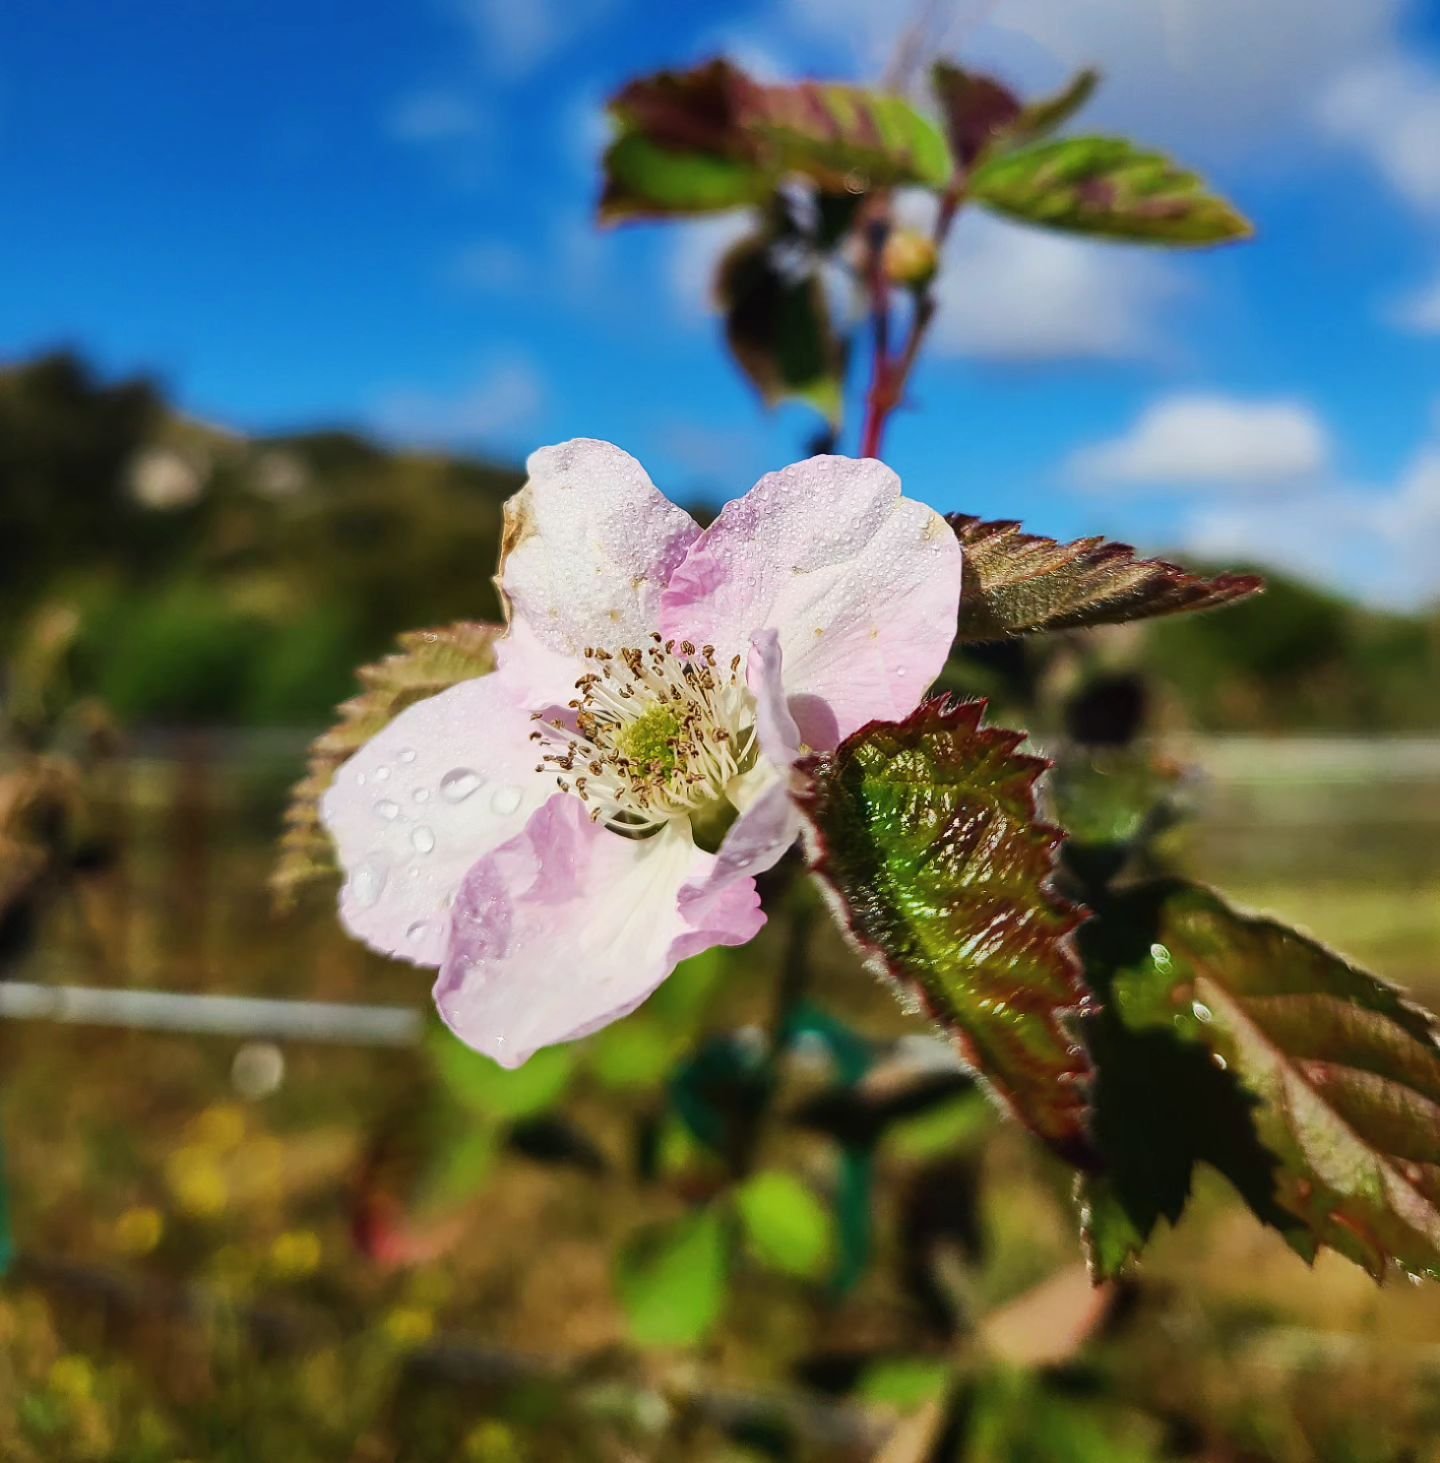 Our first official flower of the 2024 season!! 

We are so close to @theblackberryfields being a field of flowers, dappled in pink &amp; white! 

We hope y'all have a beautiful week, hopefully as beautiful as this flower🌸

Make sure to tell all your